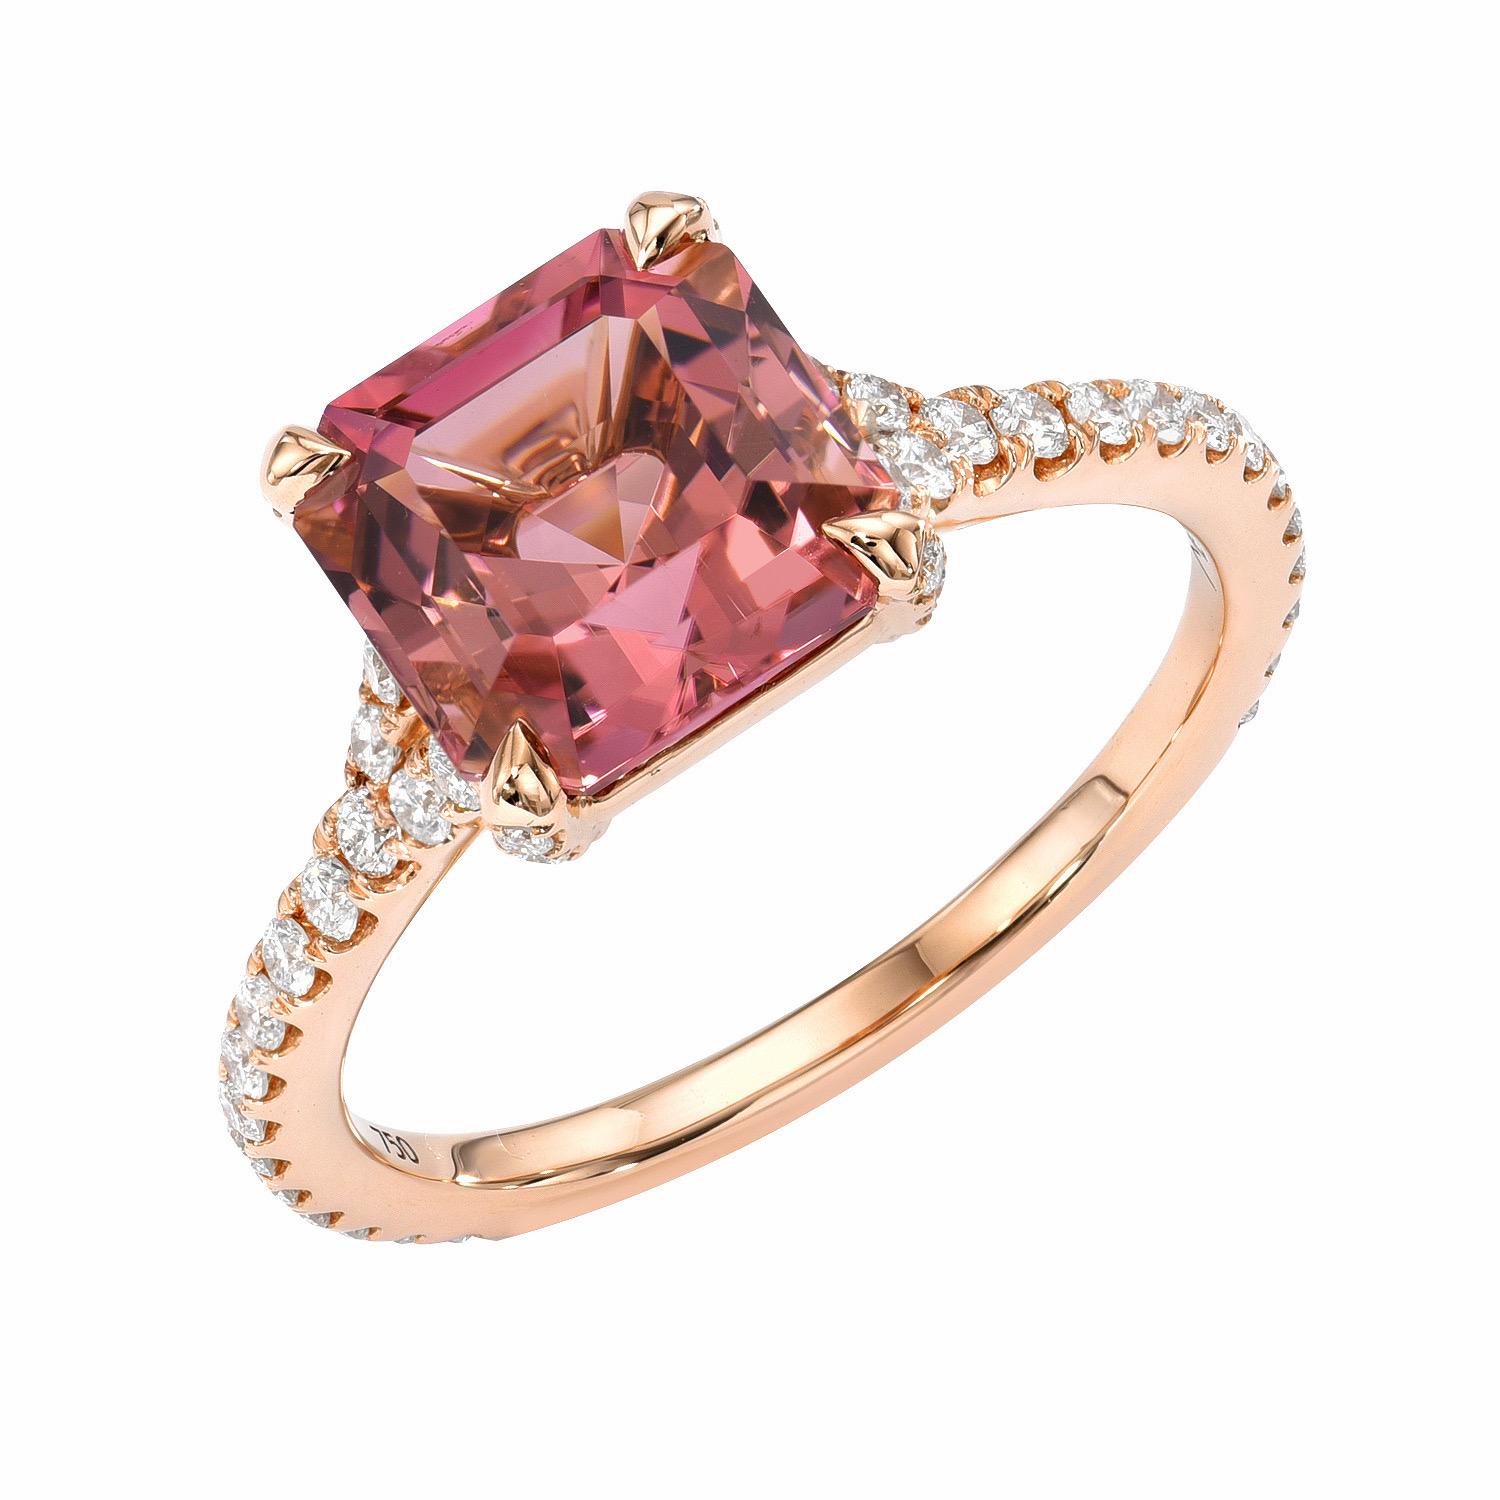 Contemporary Pink Tourmaline Ring 3.11 Carat Square Emerald Cut For Sale